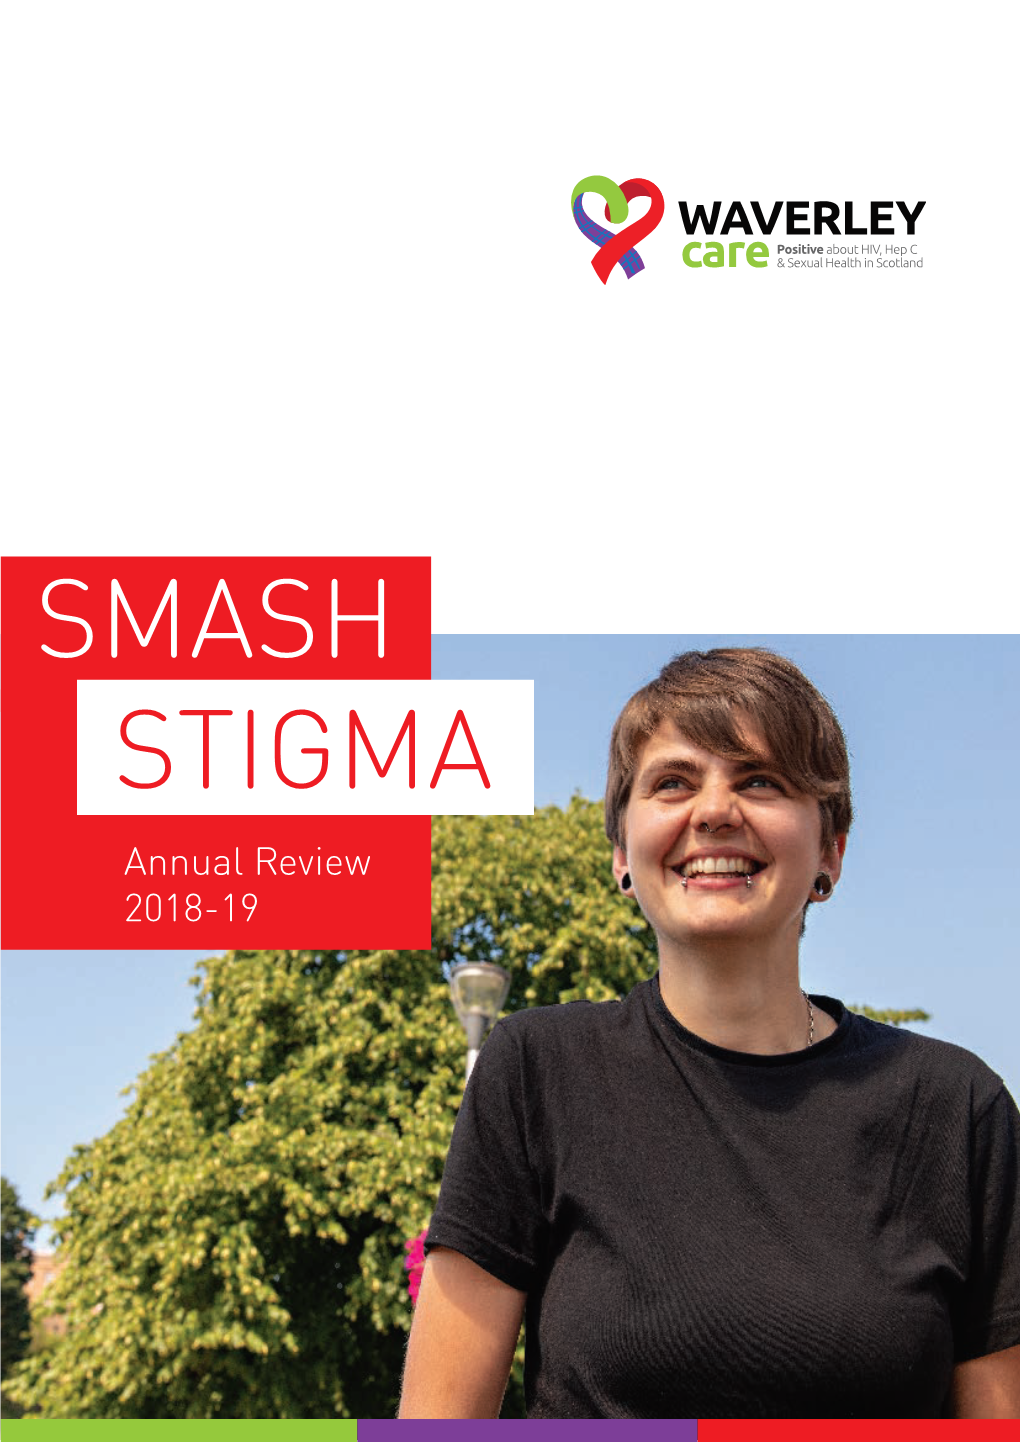 SMASH STIGMA Annual Review 2018-19 at Waverley Care, We Take a Positive Approach to HIV, Hepatitis C and Sexual Health